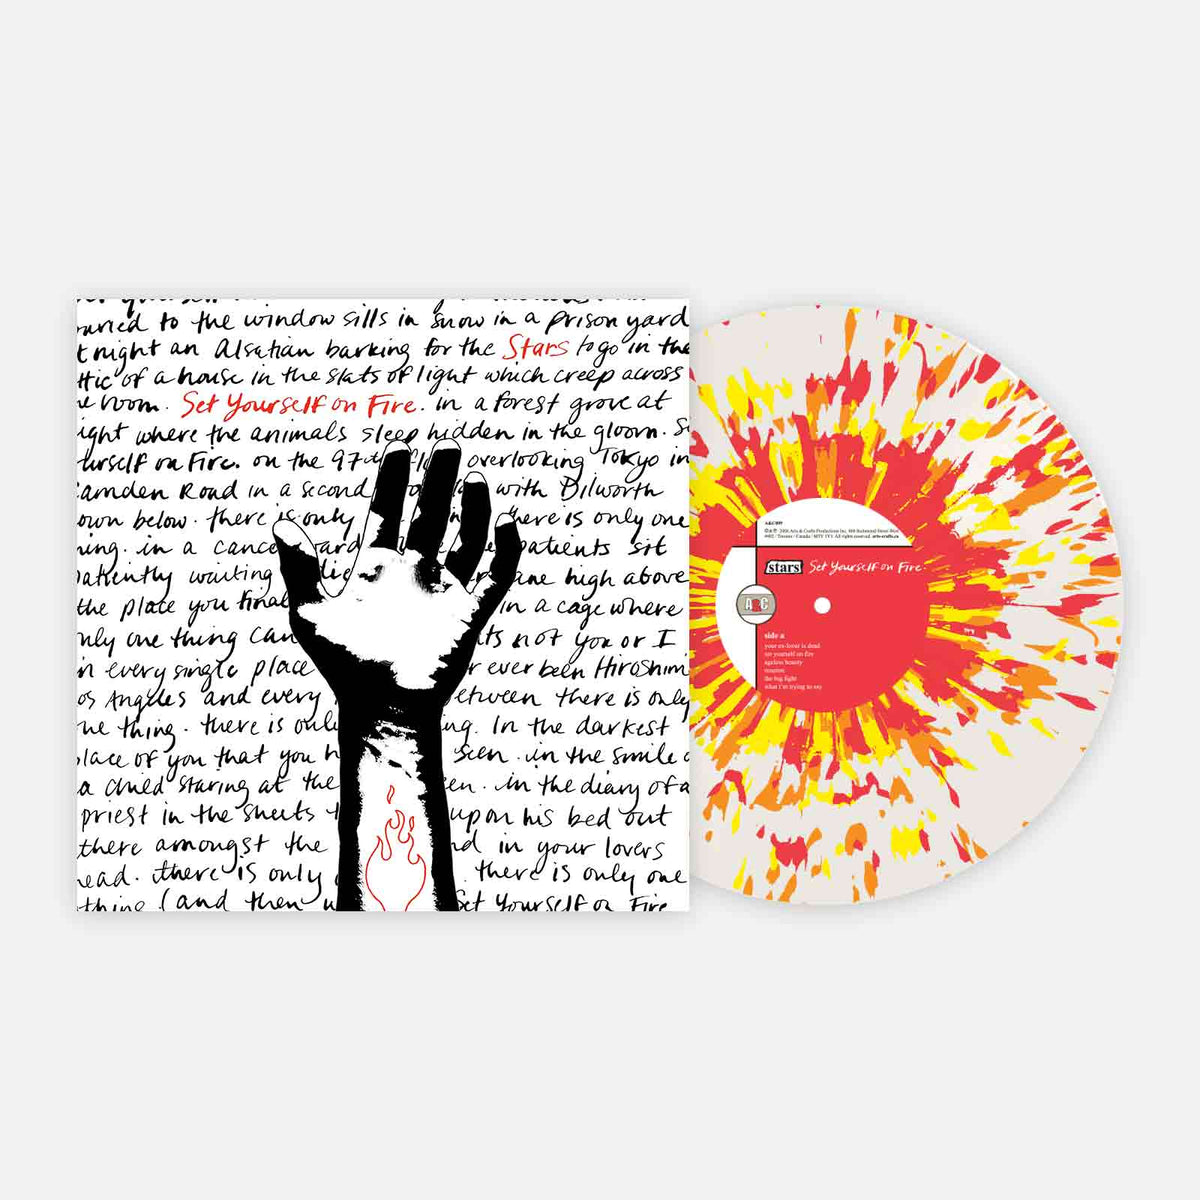 Stars Set Yourself On Fire - Deluxe 20th Anniversary Edition 12 Vinyl (Opaque  Red) - The CBP Shop